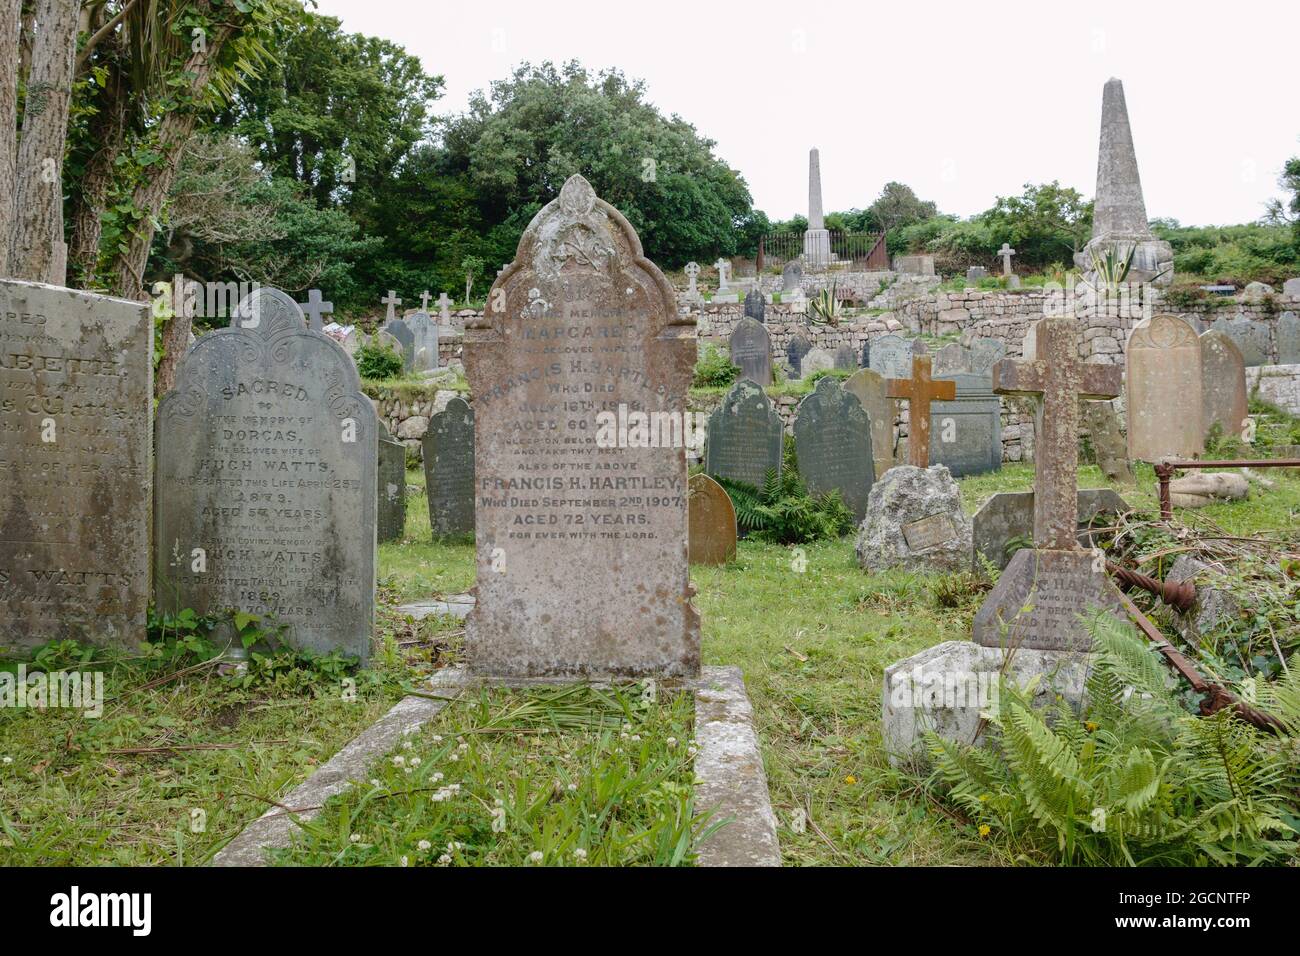 Graveyard of St Mary's Old Church, dating from the 12th century, Old Town, St Mary's island, Isles of Scilly, Cornwall, England, UK, July 2021 Stock Photo